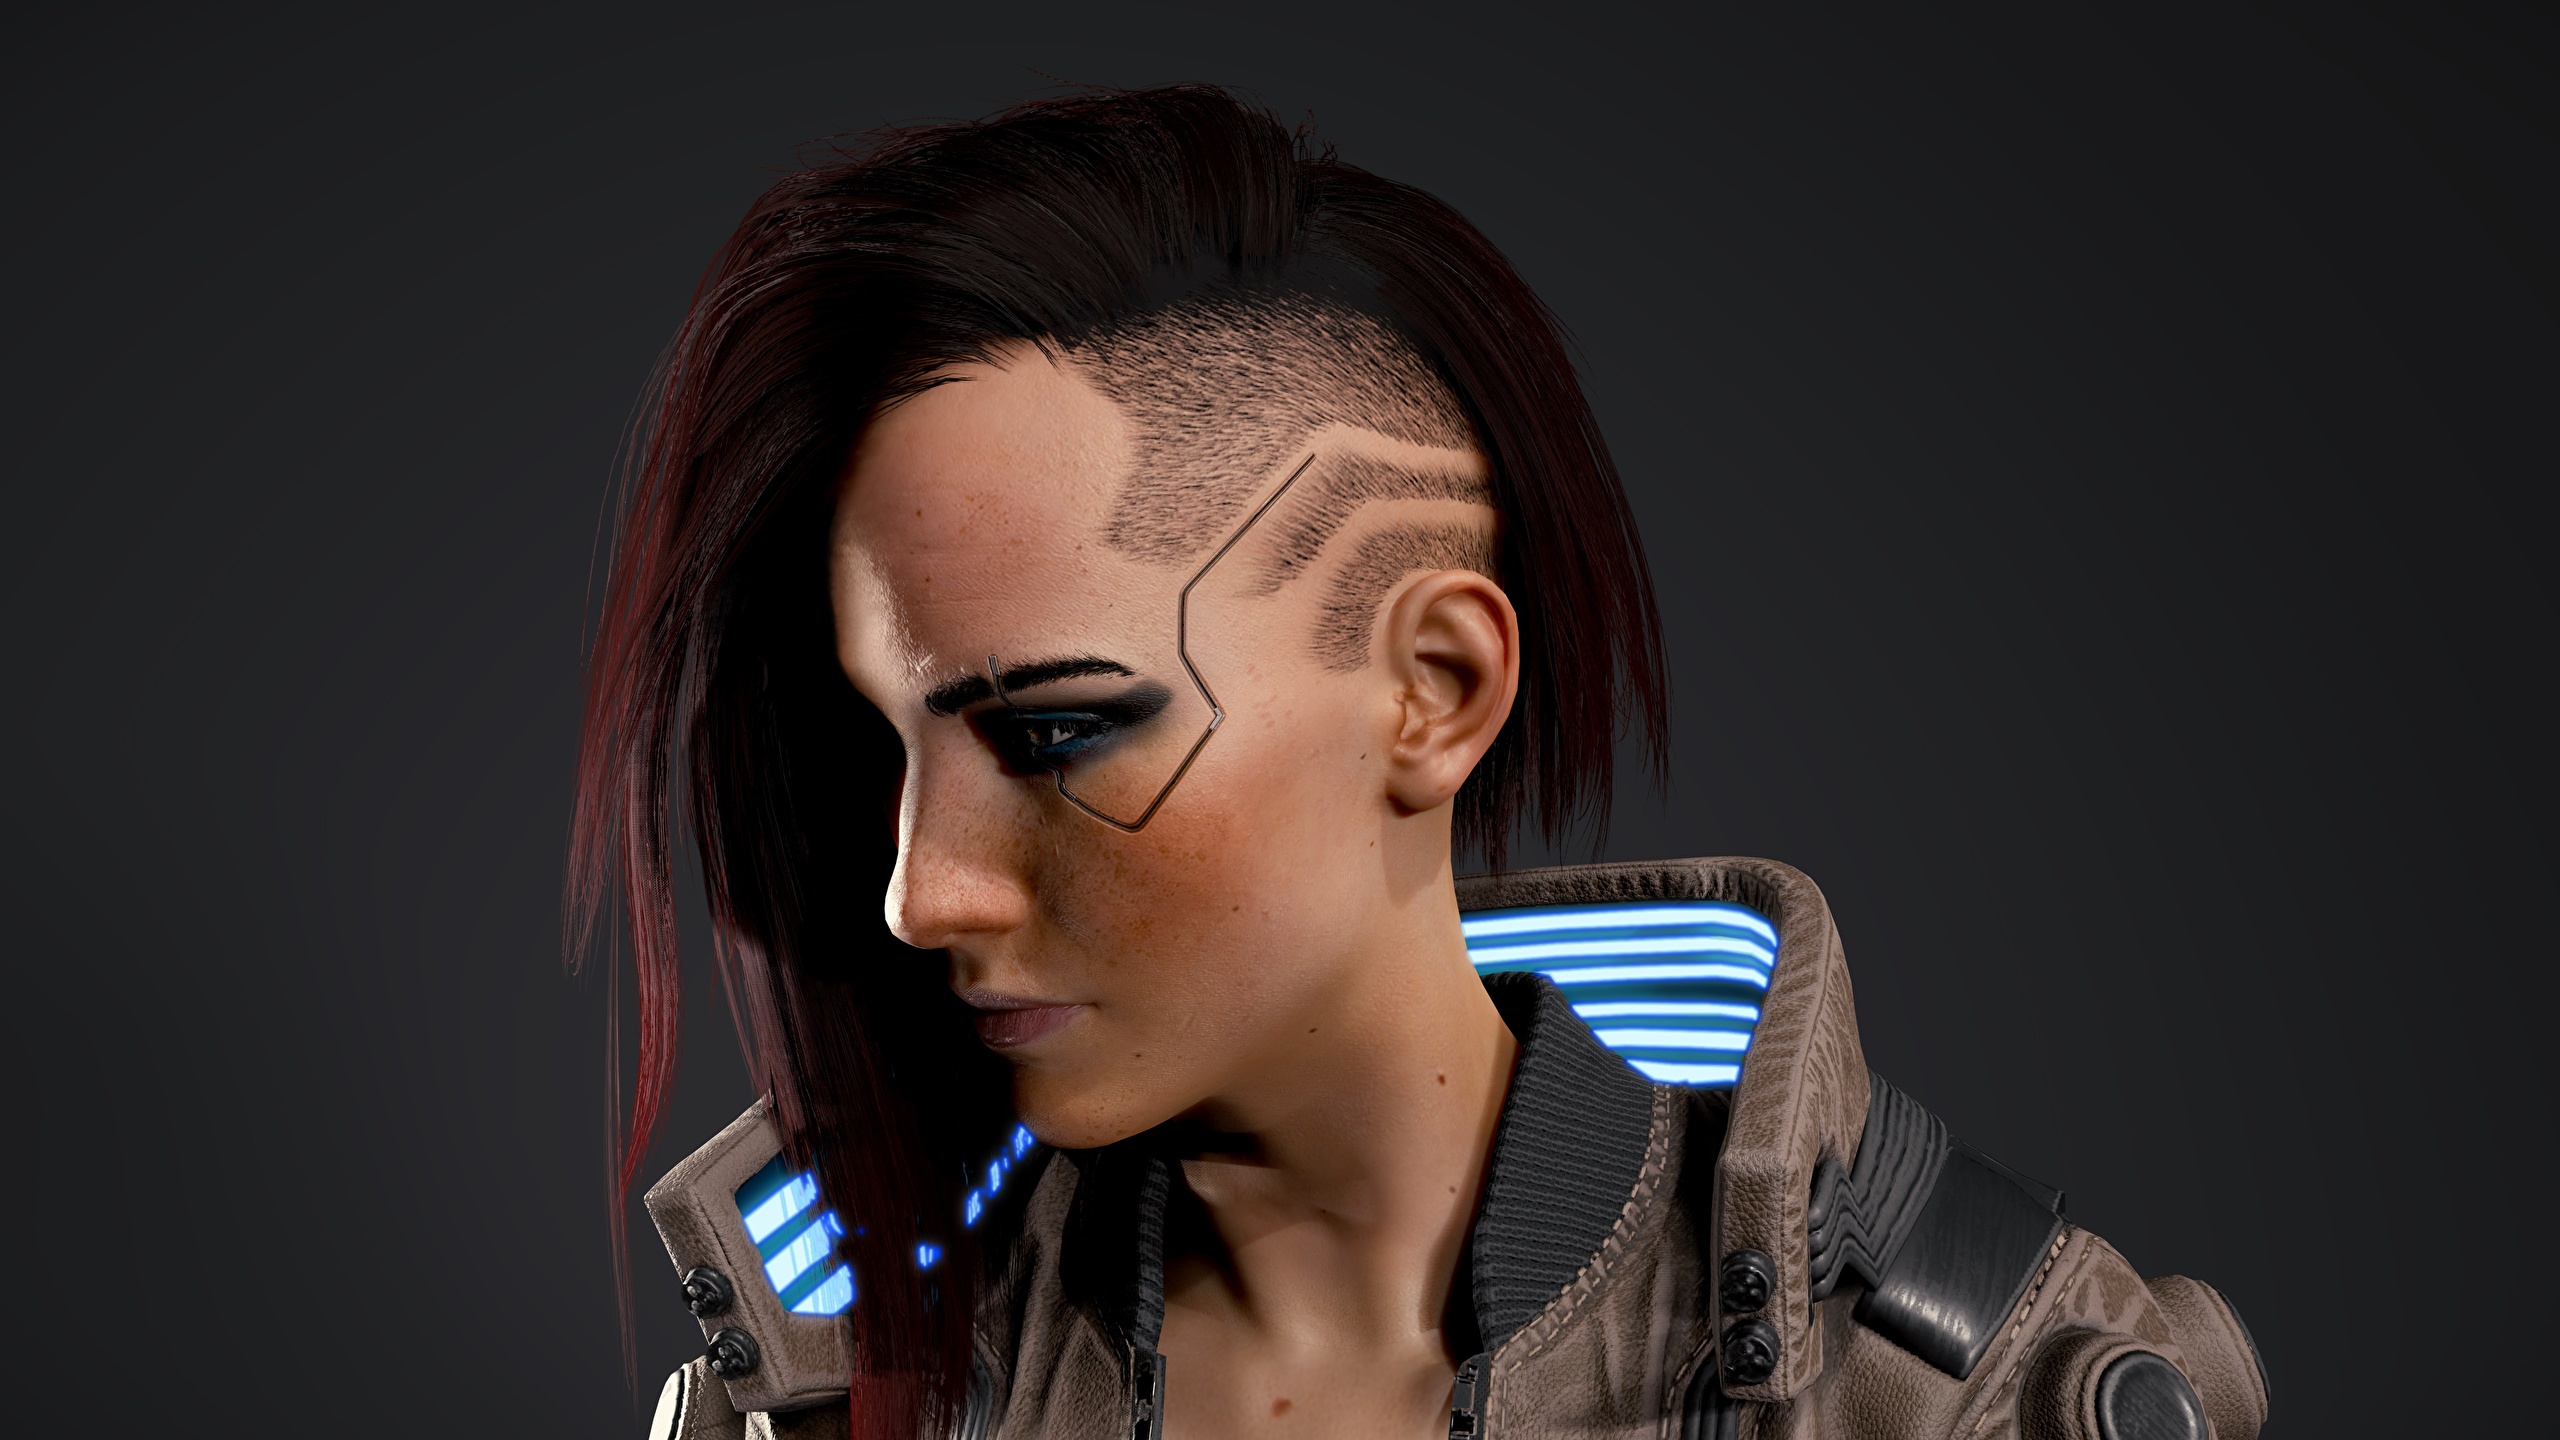 5. The top cyberpunk hairstyles featuring blue hair - wide 8